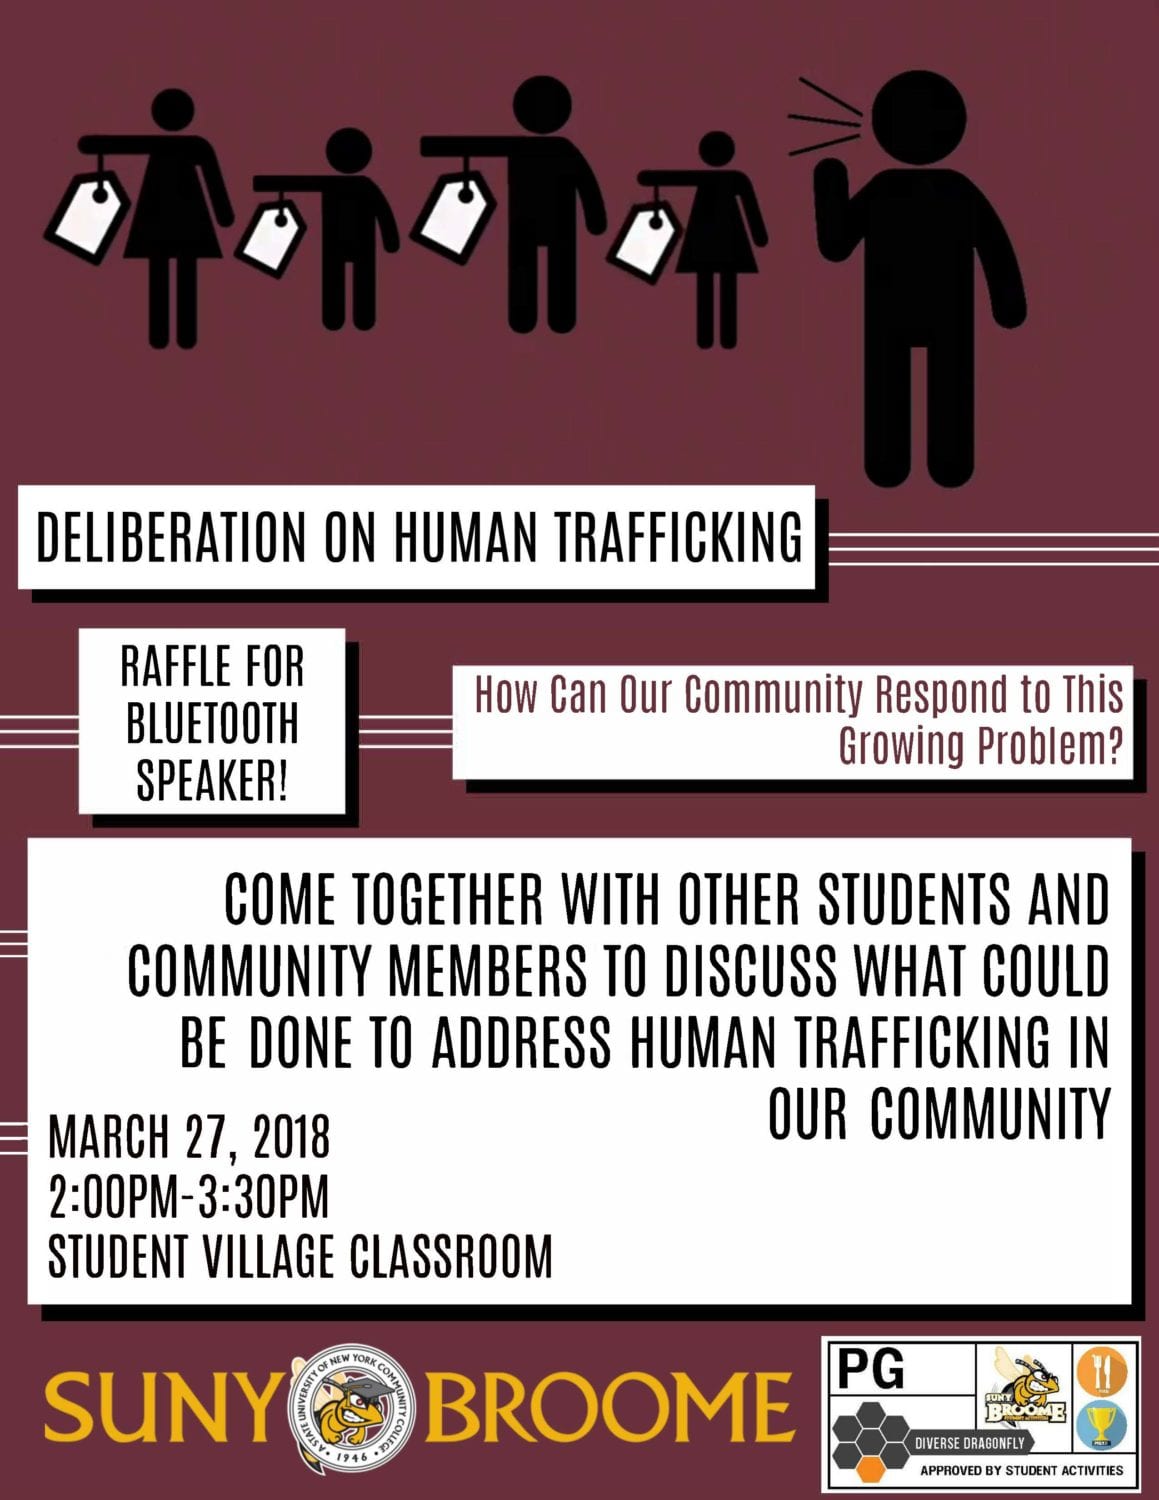 March 27 event: Public deliberation on human trafficking